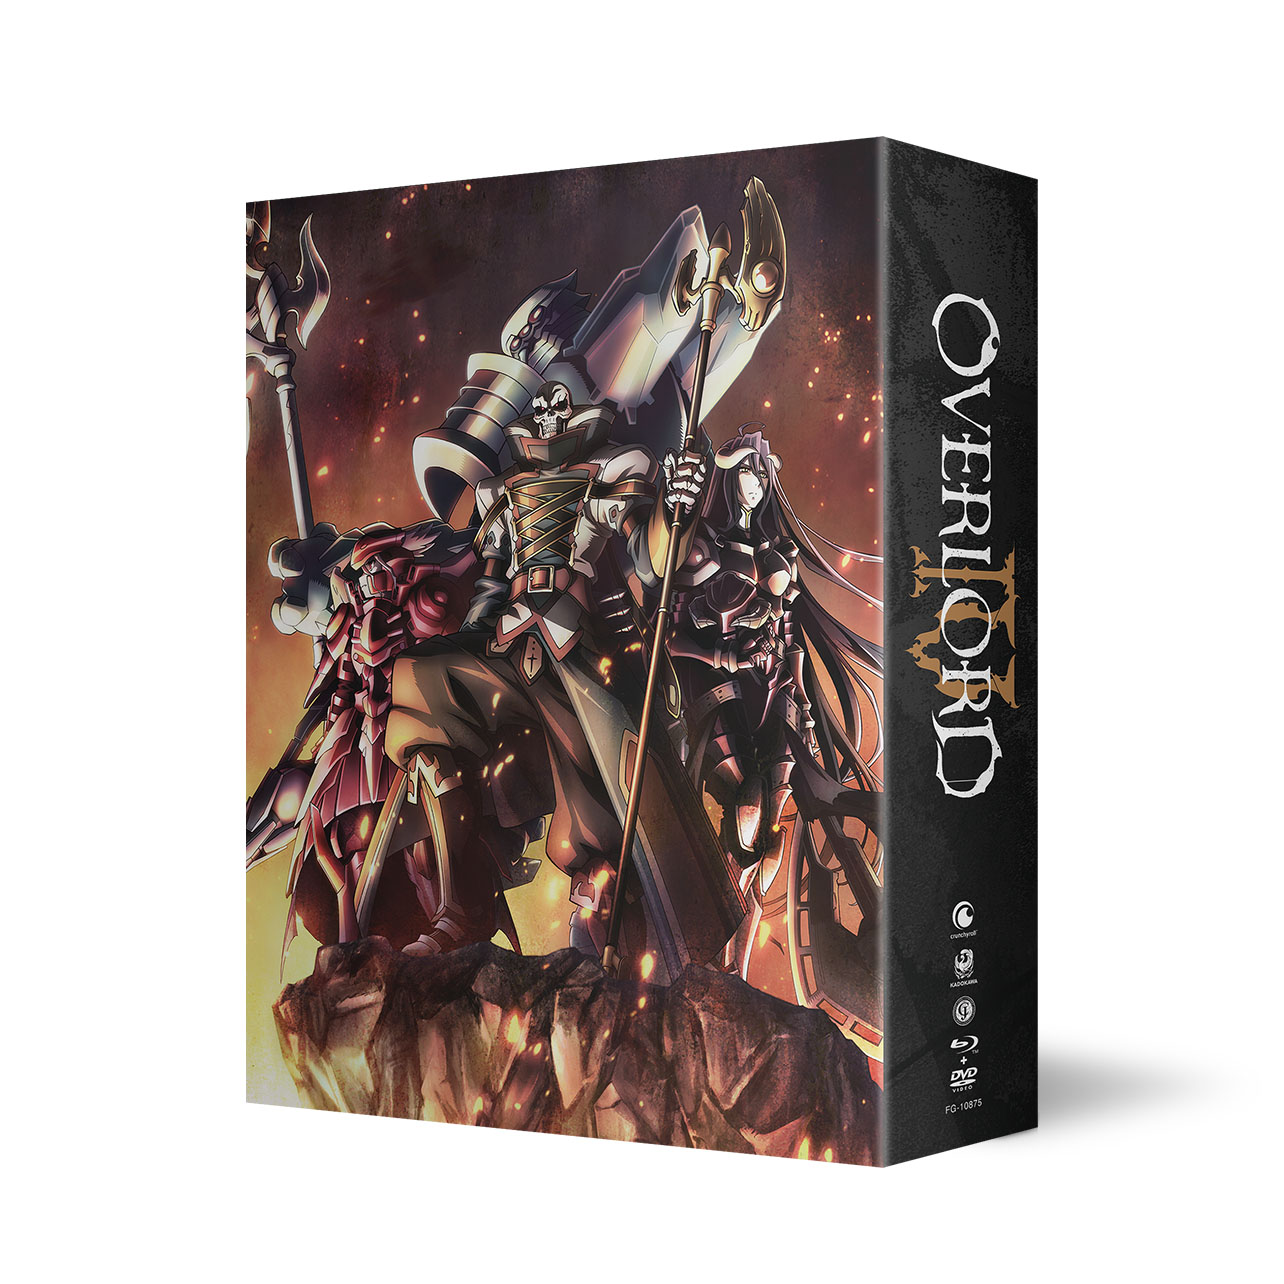 Overlord IV - Season 4 - Blu-ray + DVD - Limited Edition image count 3